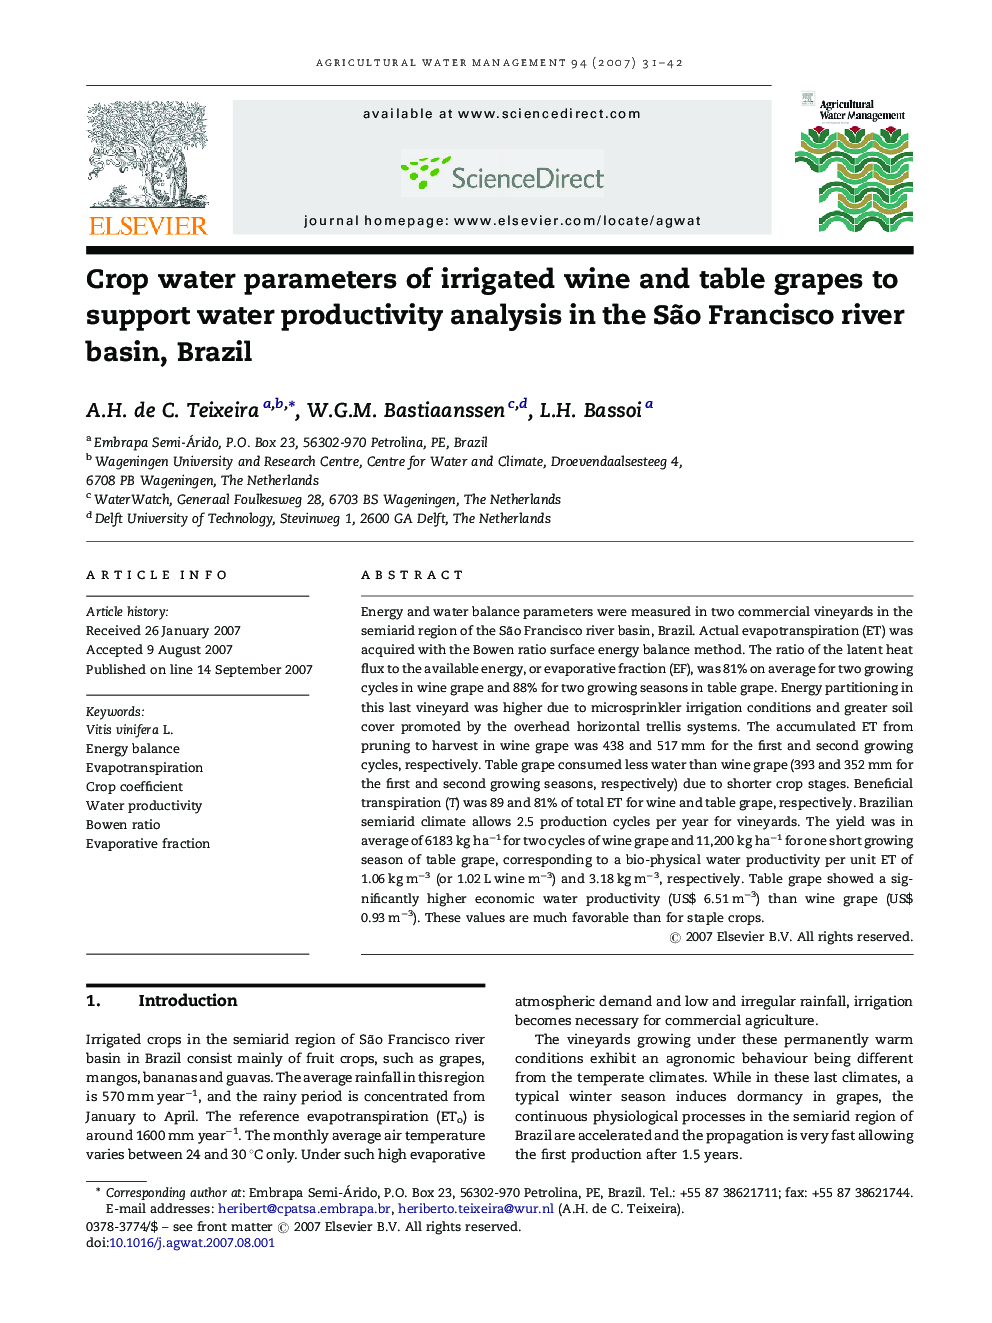 Crop water parameters of irrigated wine and table grapes to support water productivity analysis in the São Francisco river basin, Brazil